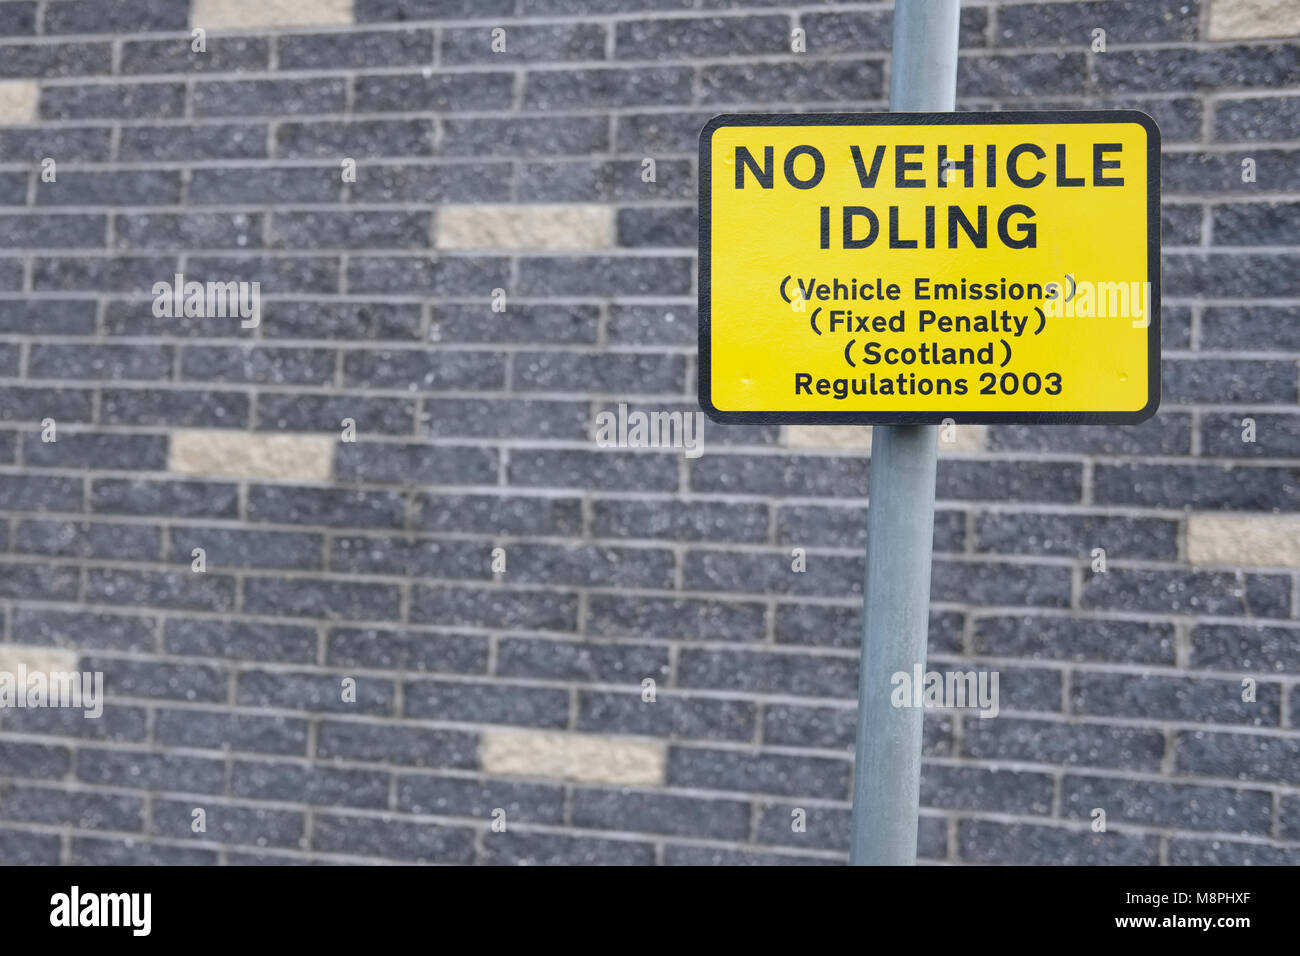 No vehicle idle idling fixed penalty car emissions pollution act sign post at road street in city Stock Photo